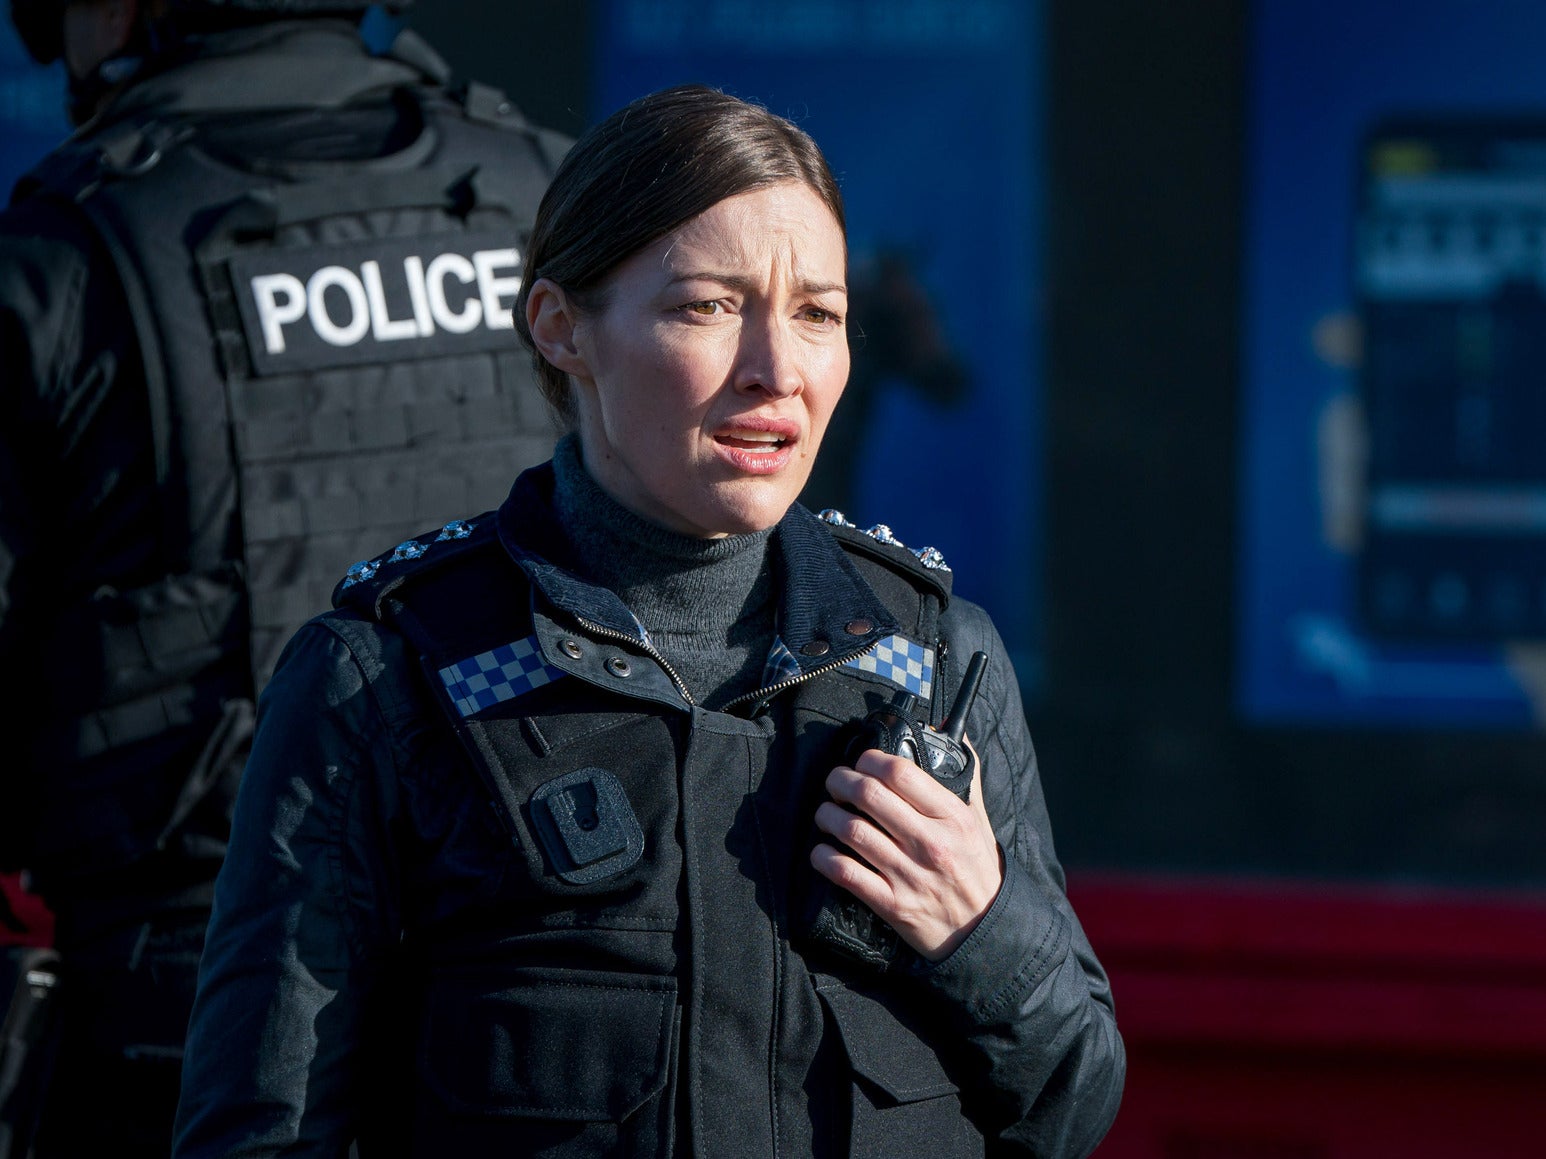 Kelly Macdonald as the enigmatic DCI Jo Davidson in Line of Duty